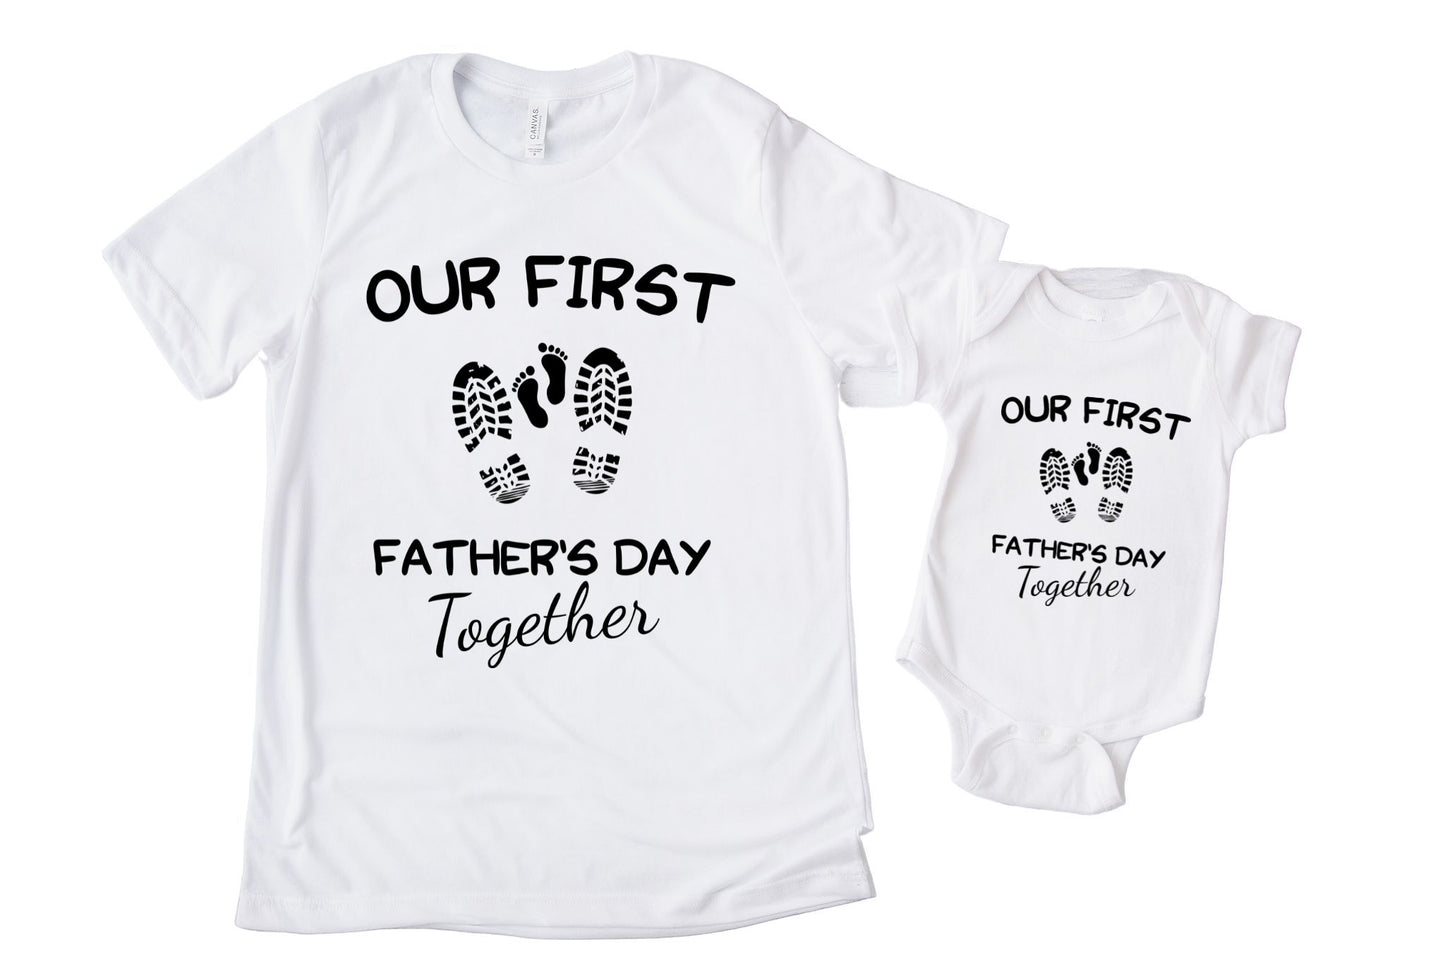 Our First Fathers Day Together Matching Shirt Set